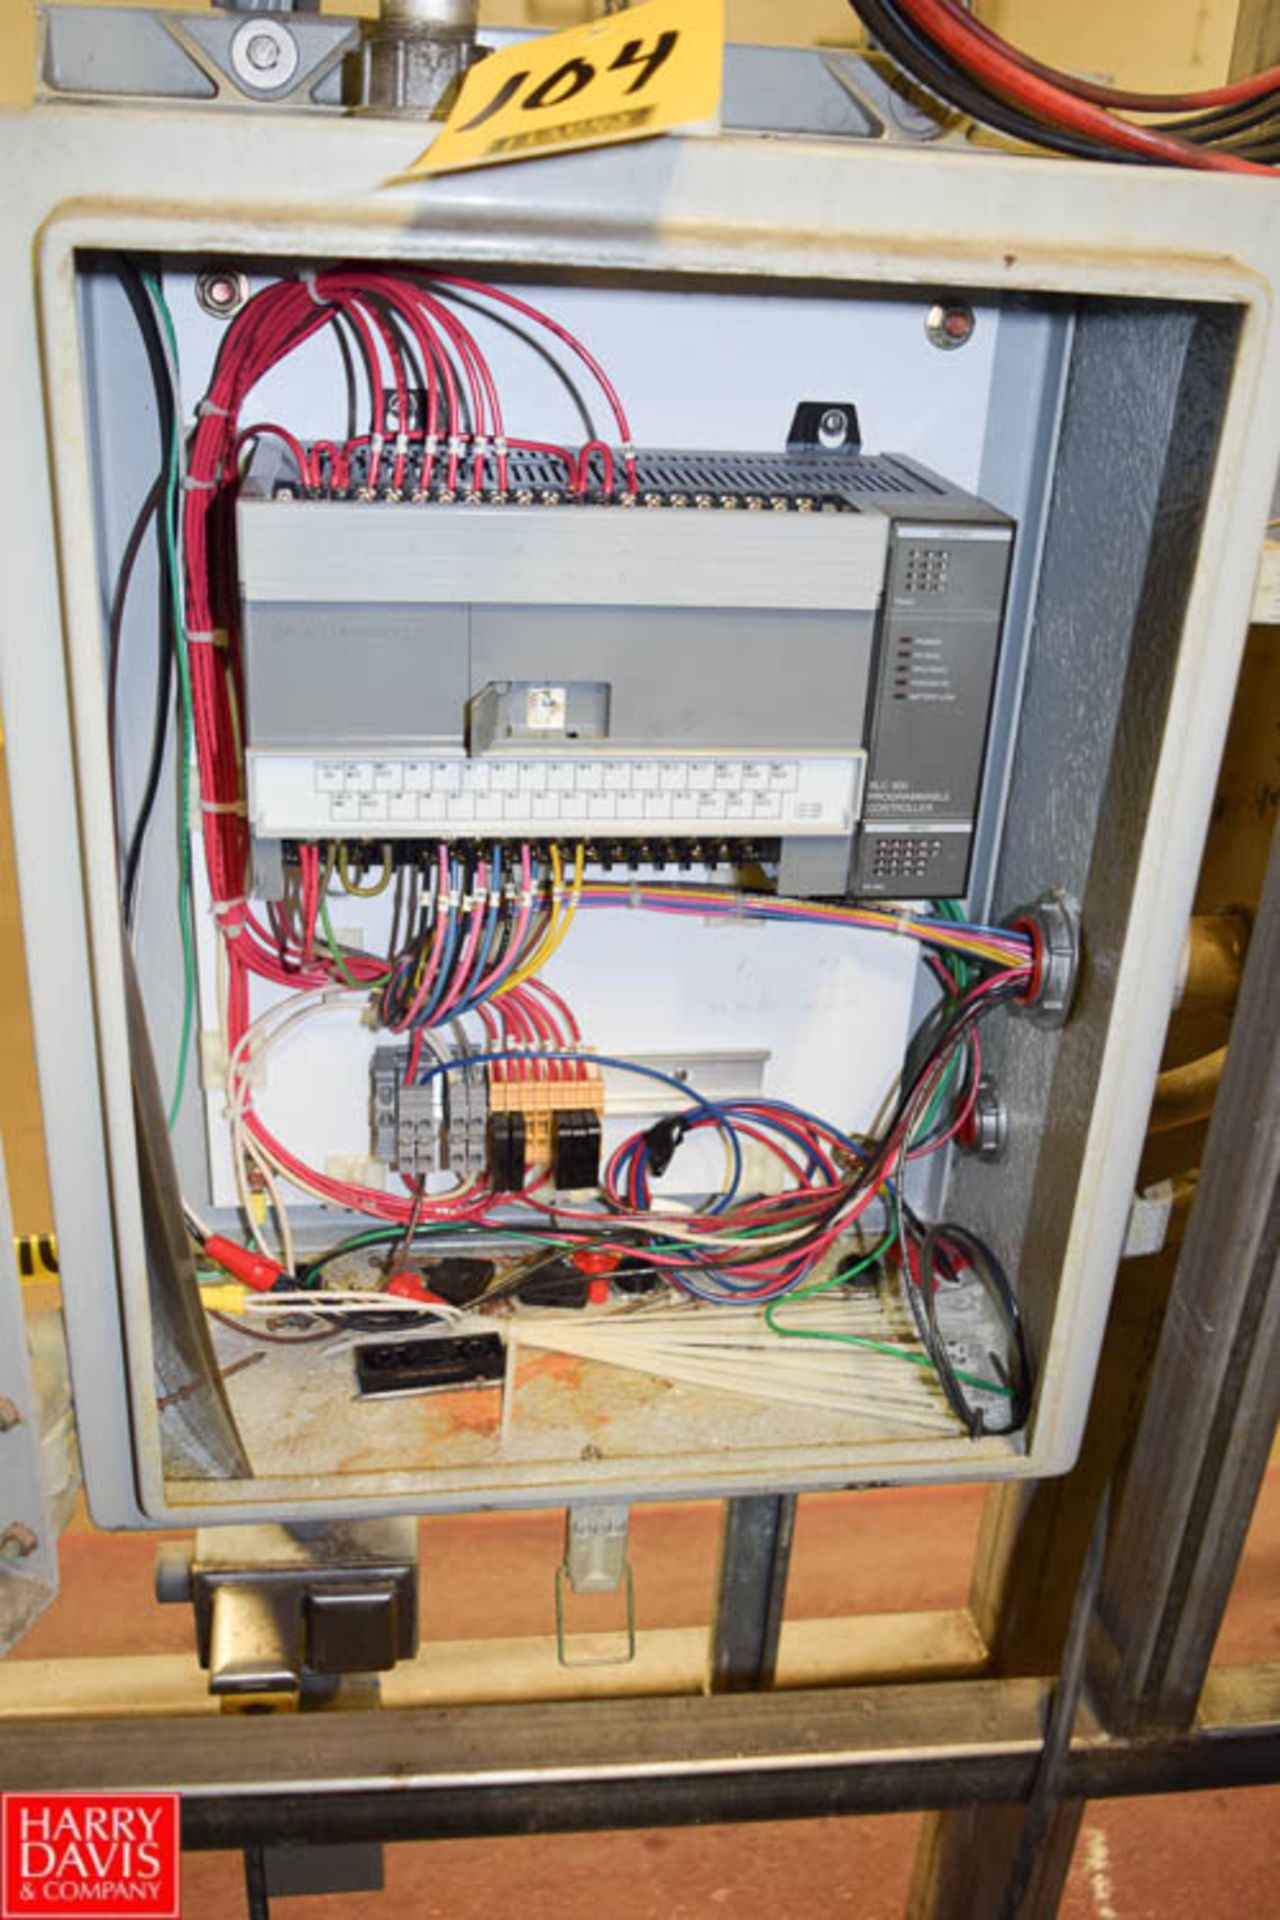 Allen Bradley PLC Controller with Cabinet - Rigging Price $ 50